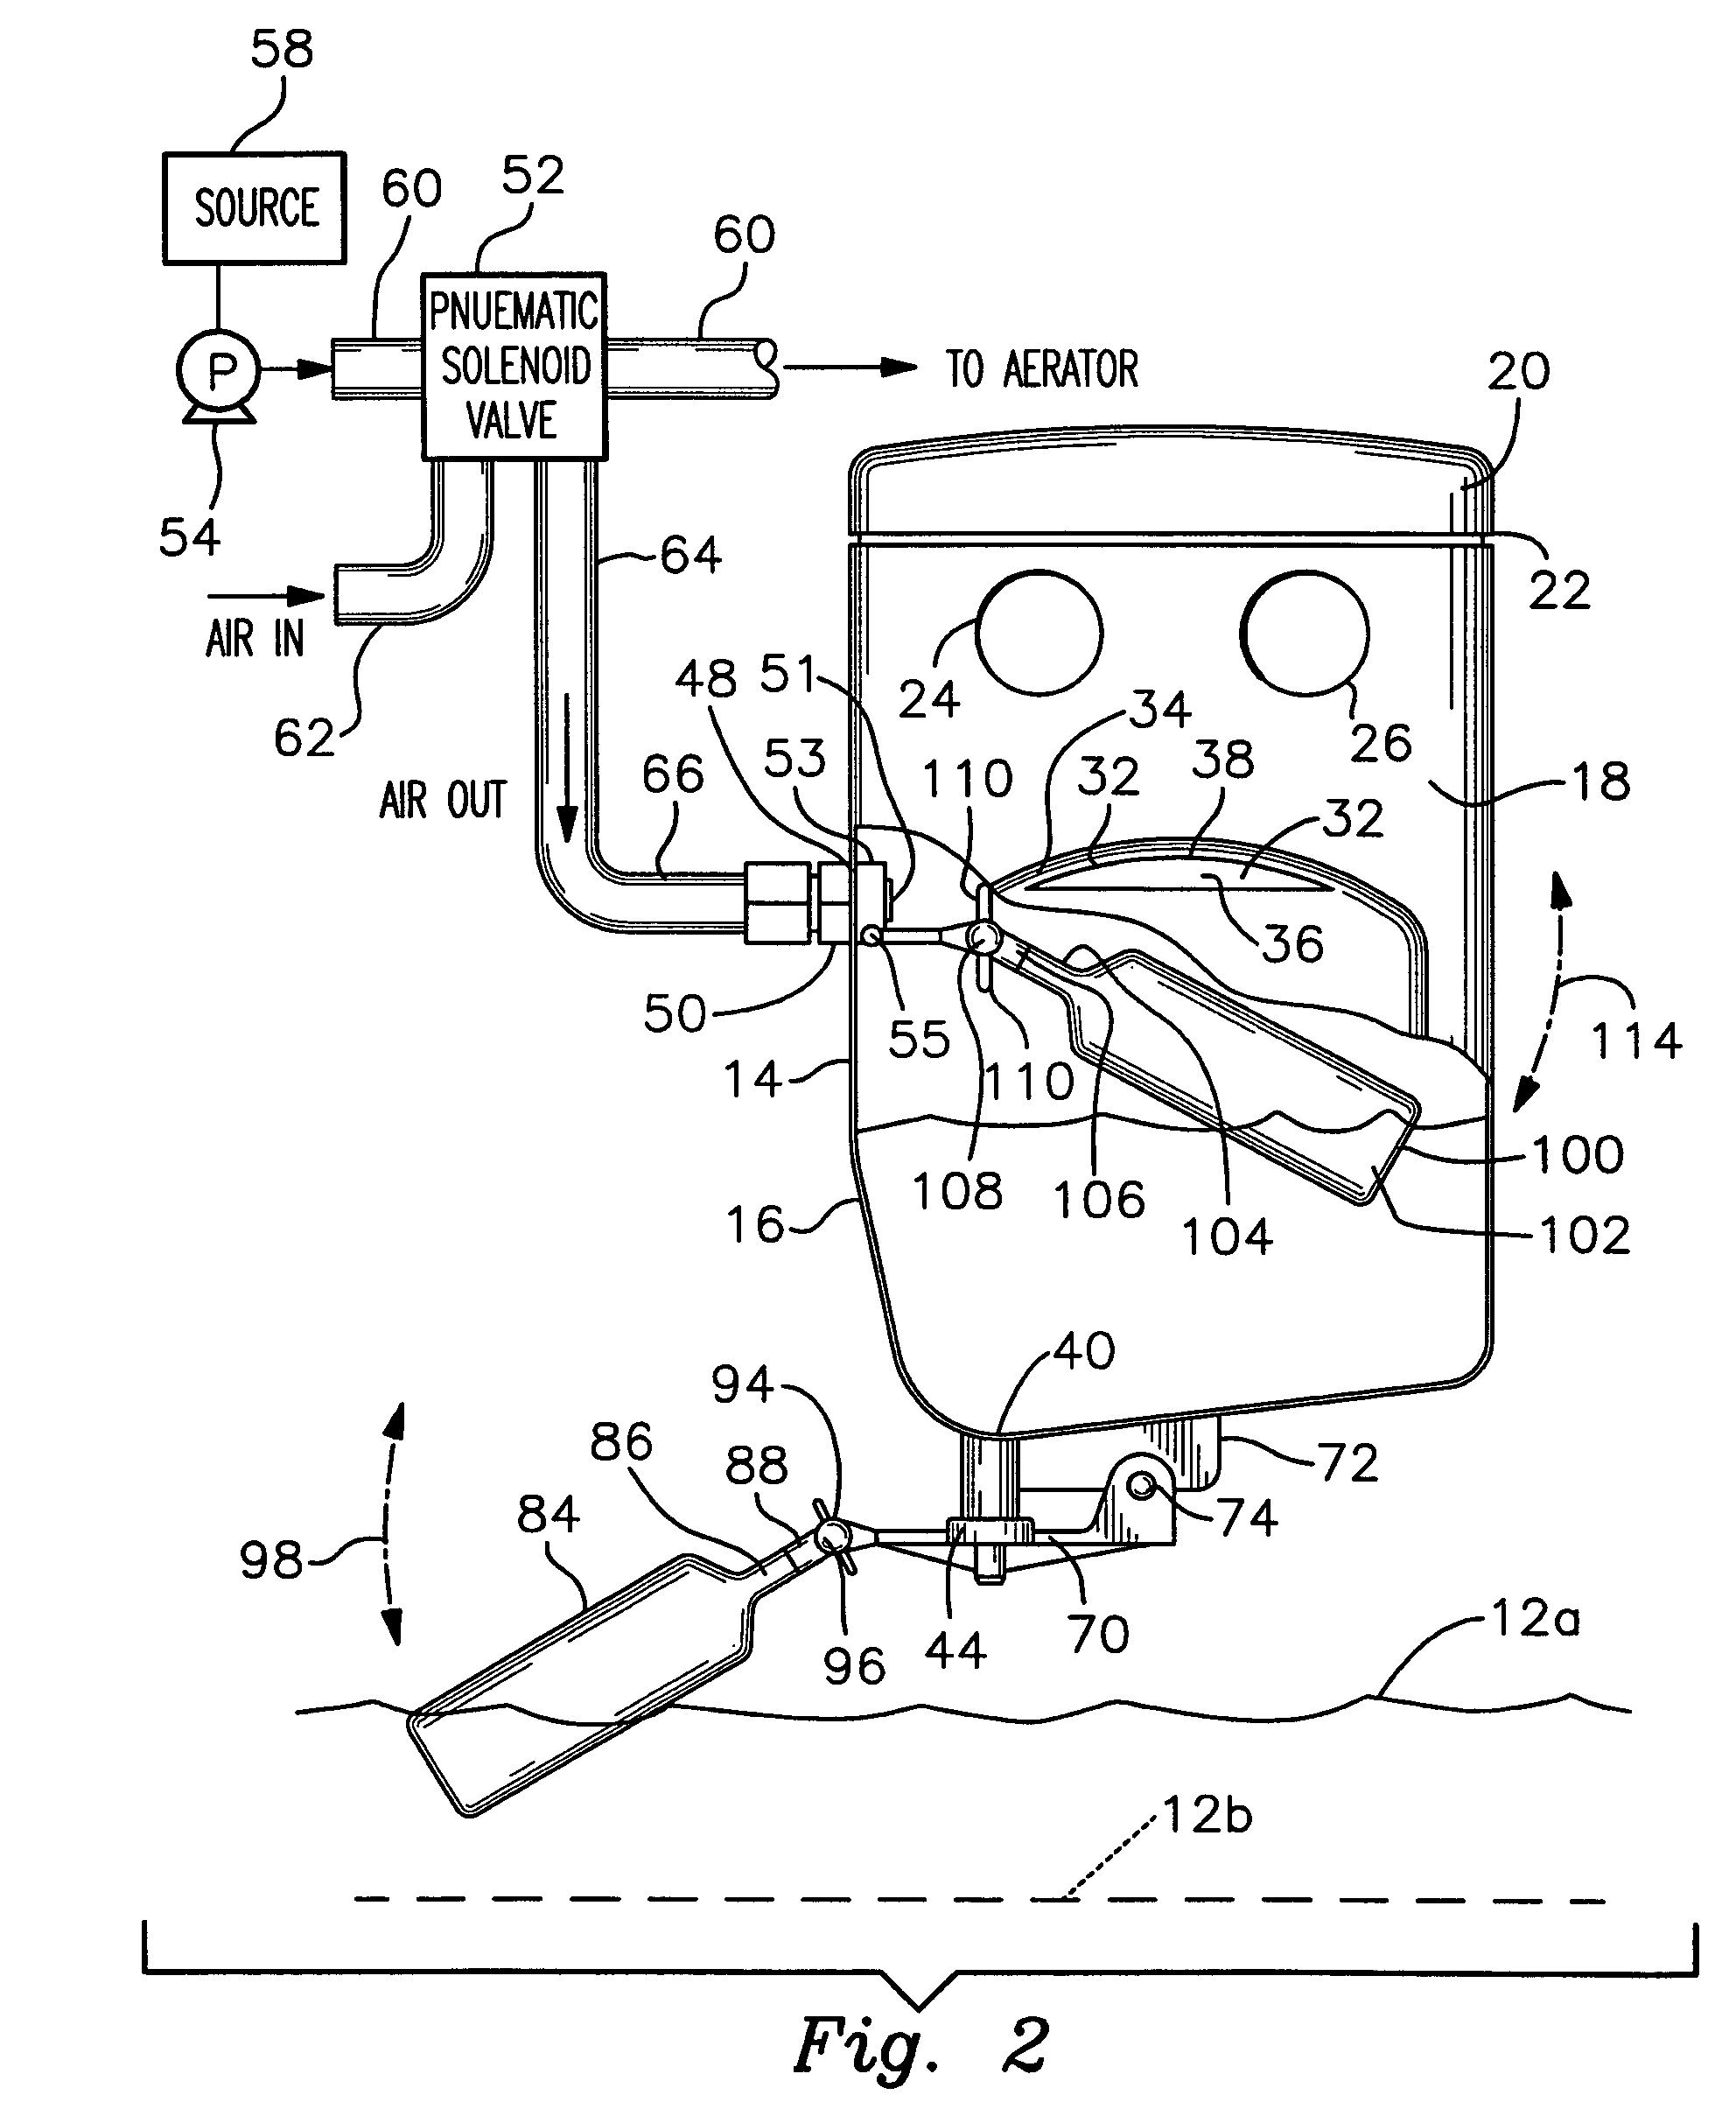 Refill control mechanism for a liquid holding tank